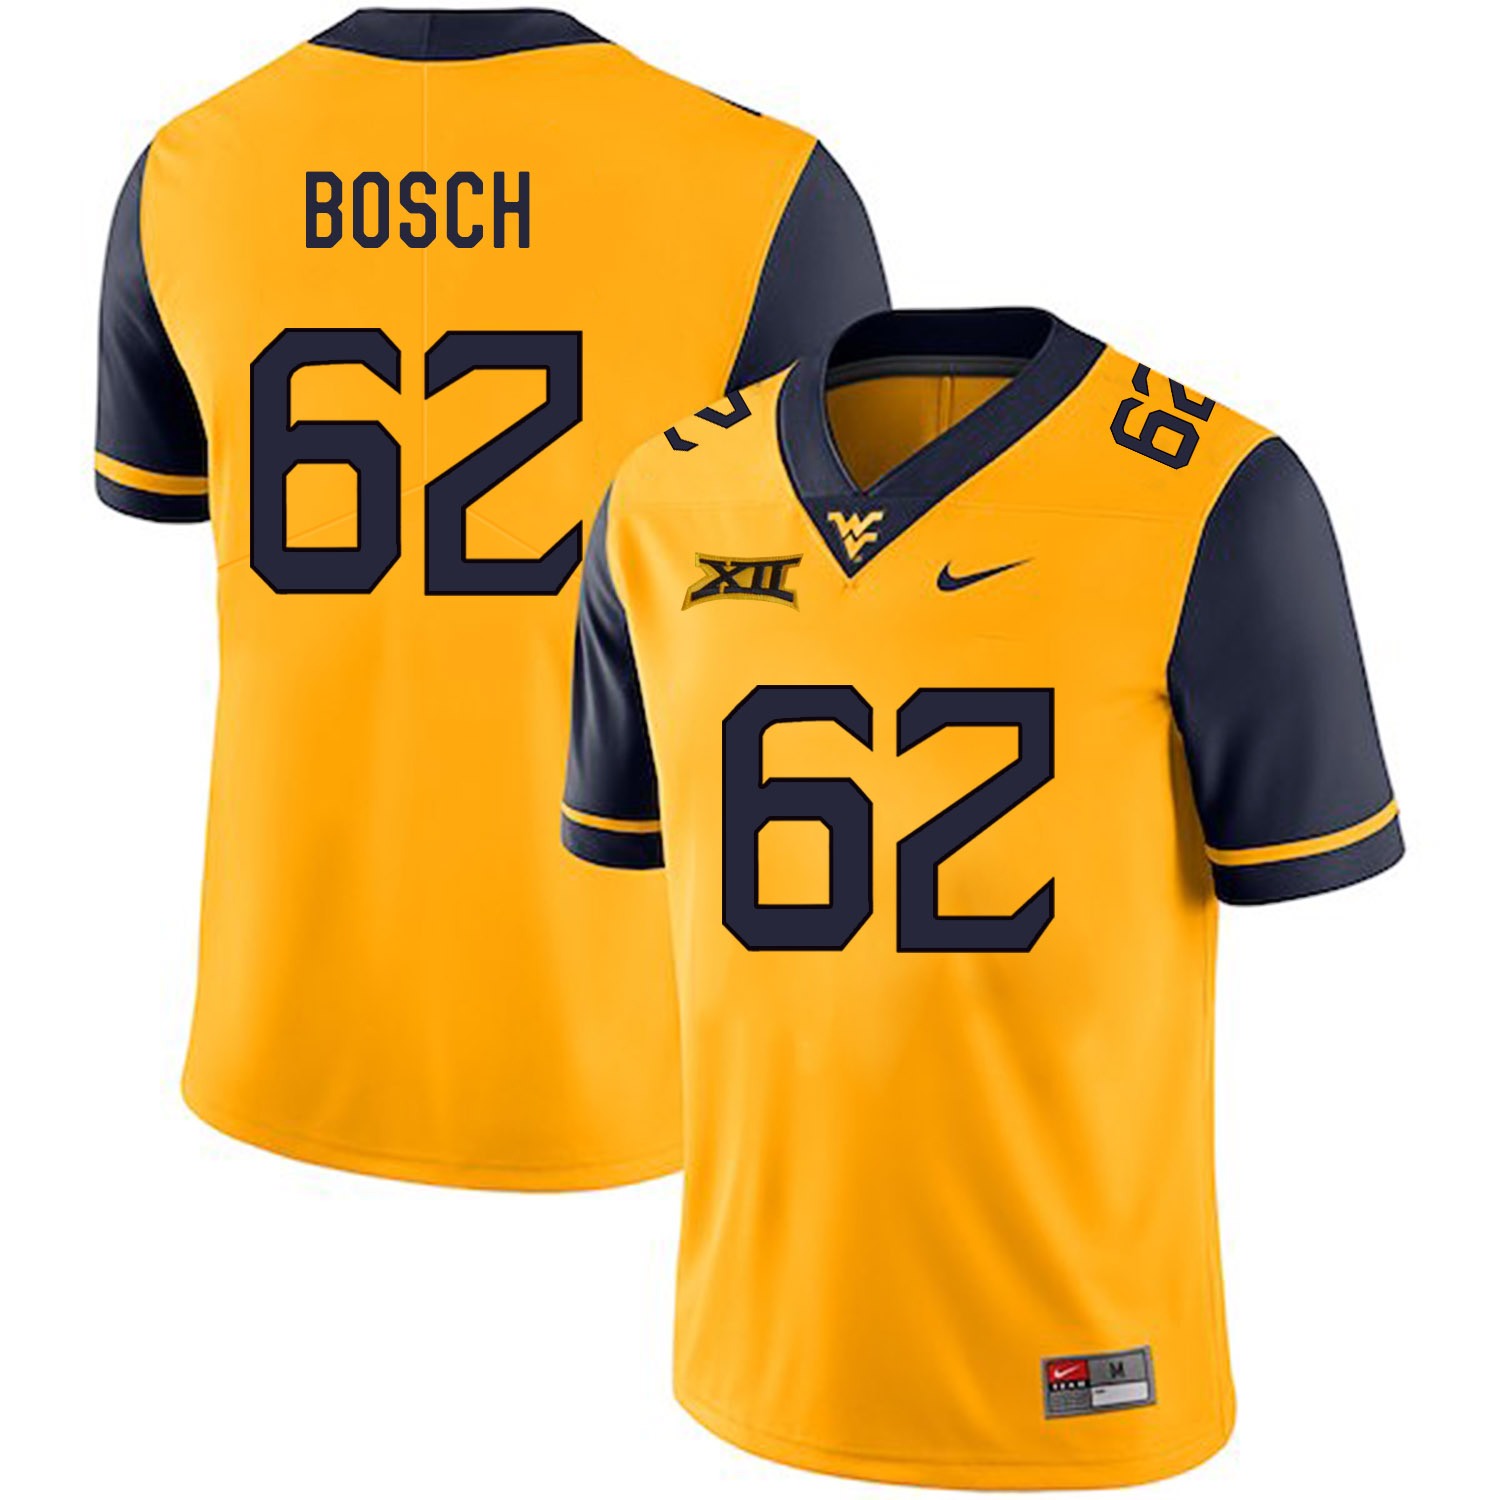 West Virginia Mountaineers 62 Kyle Bosch Gold College Football Jersey